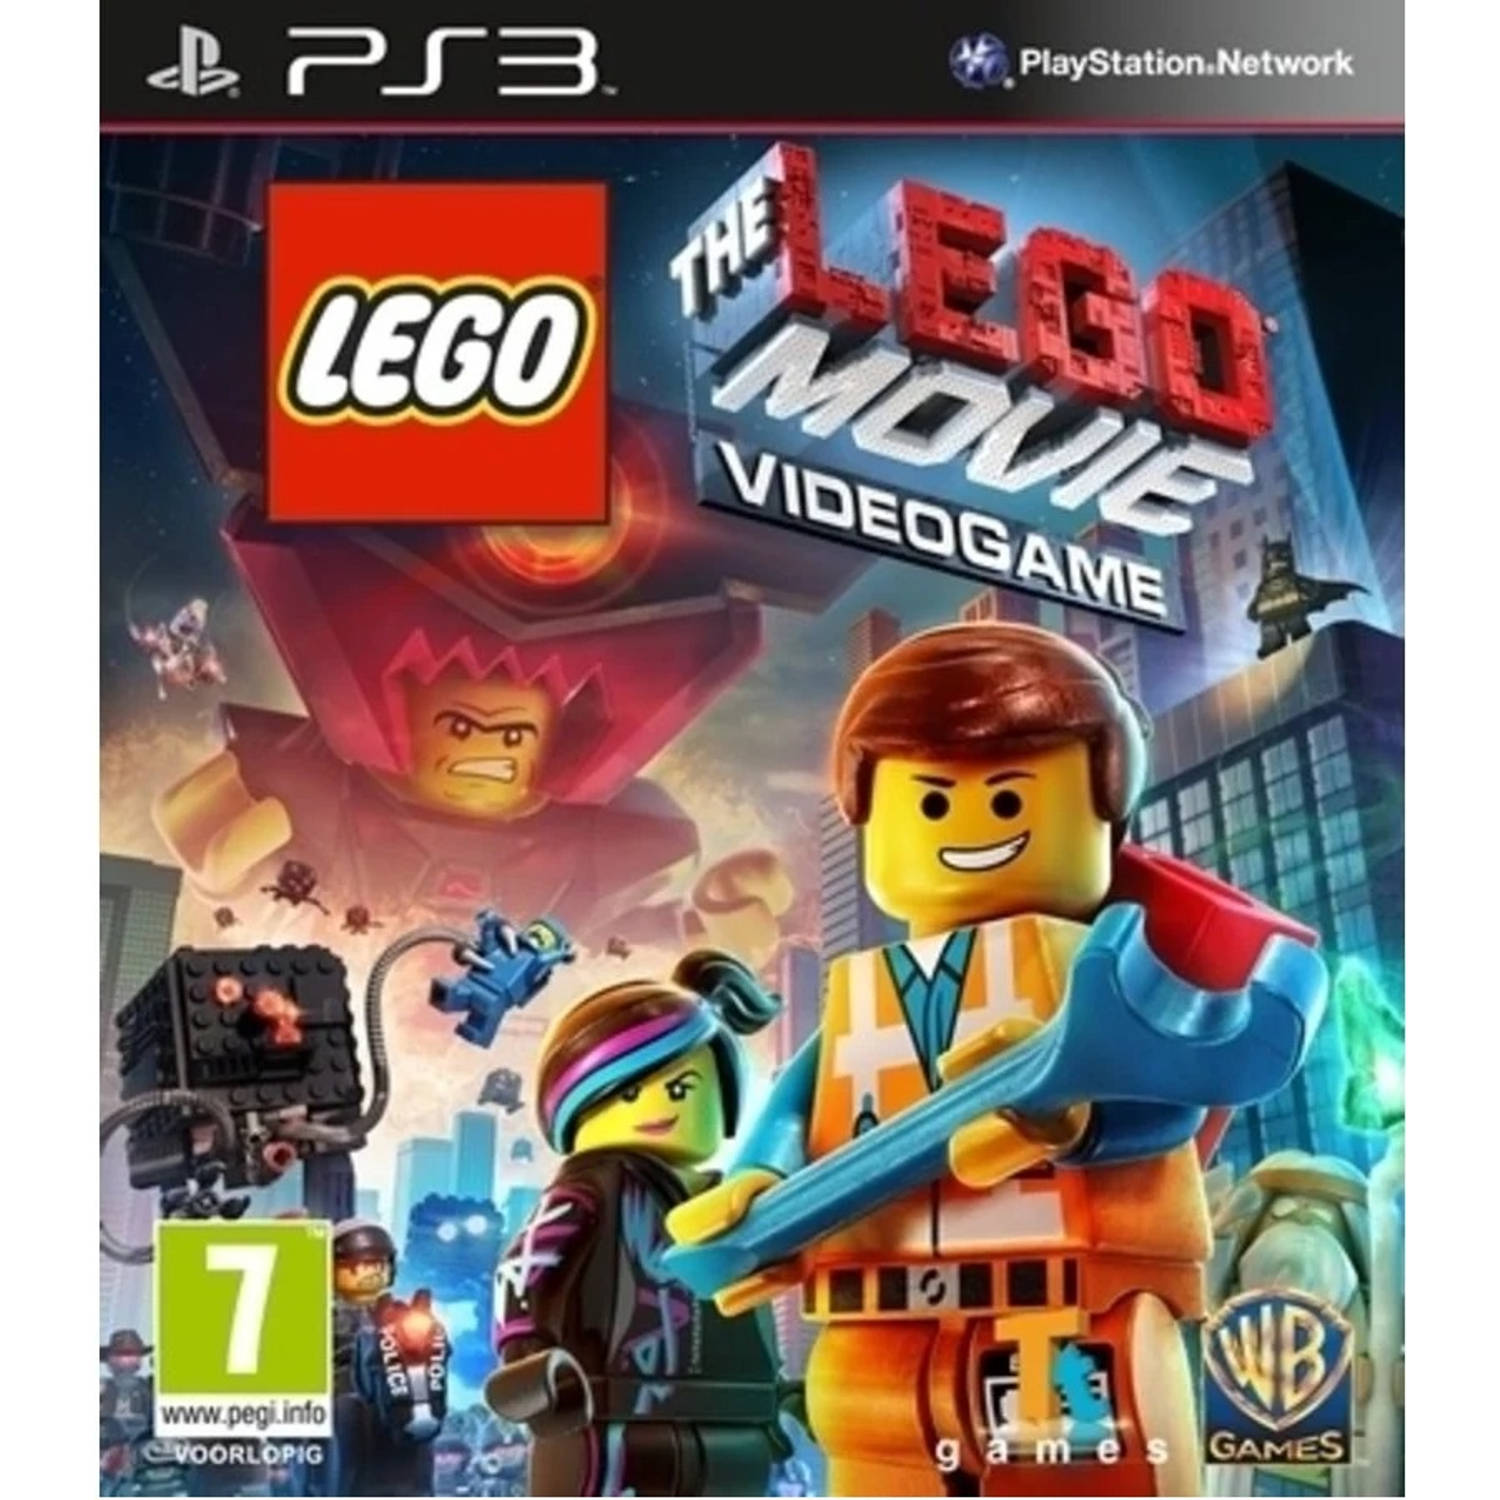 PS3 LEGO Movie Videogame